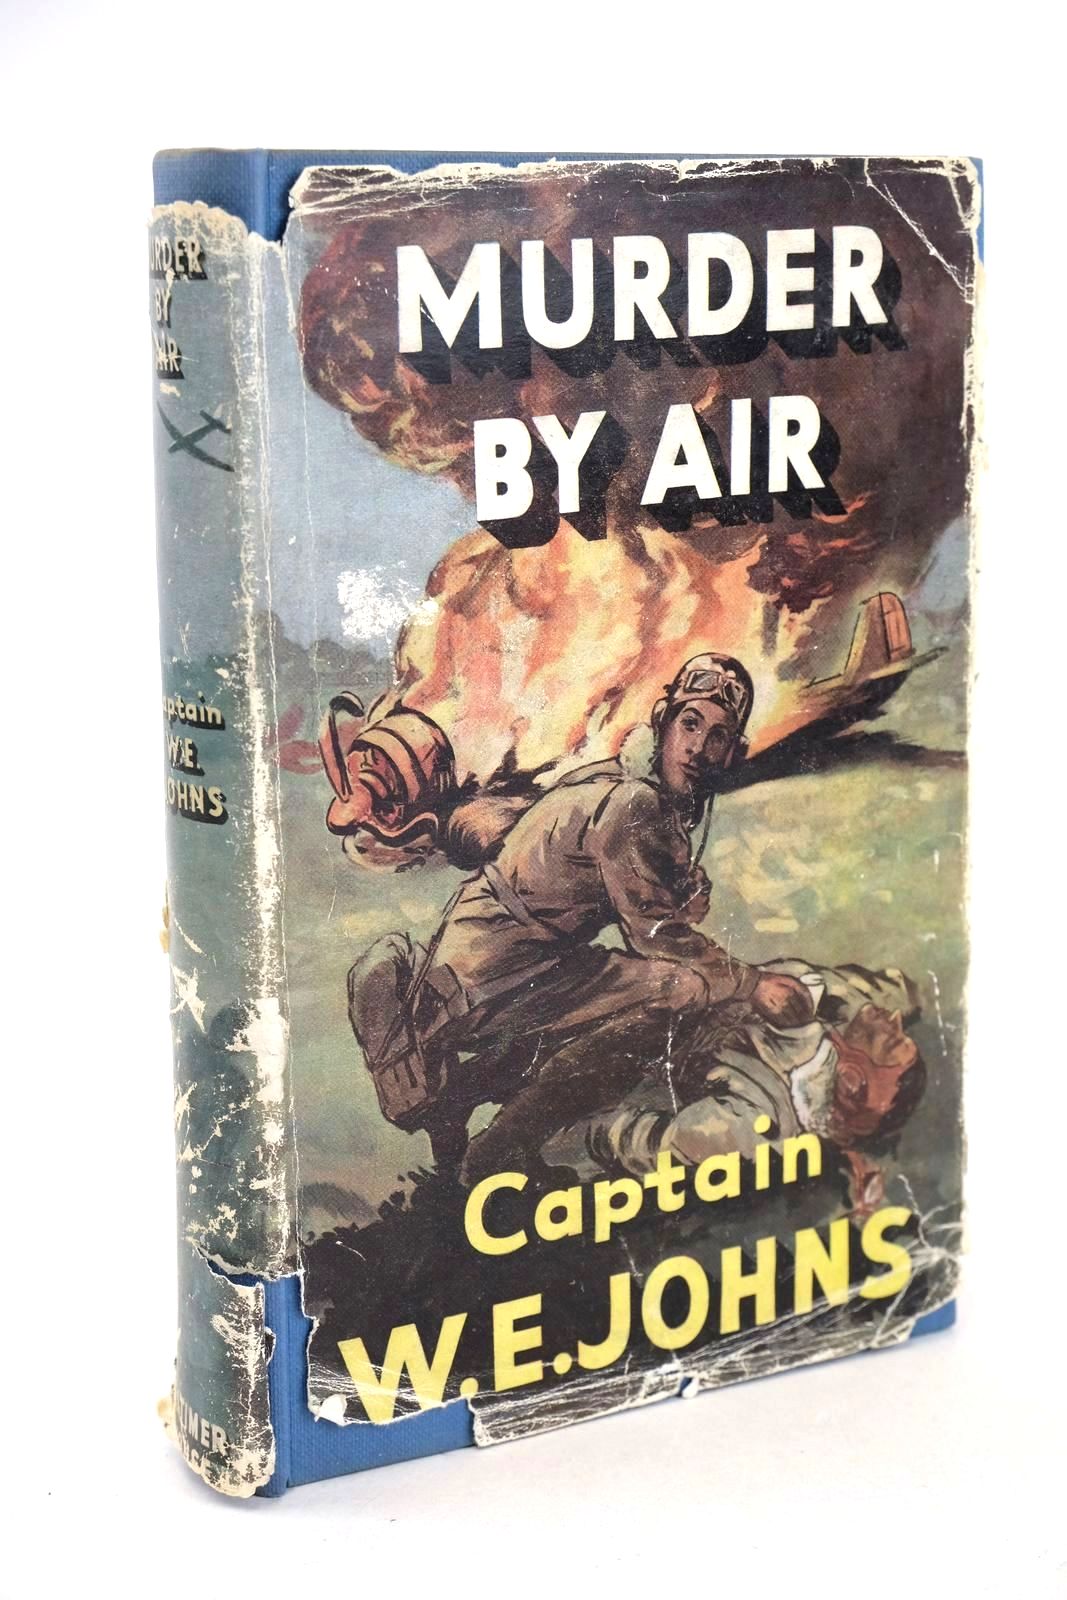 Photo of MURDER BY AIR written by Johns, W.E. published by Latimer House Ltd. (STOCK CODE: 1326376)  for sale by Stella & Rose's Books